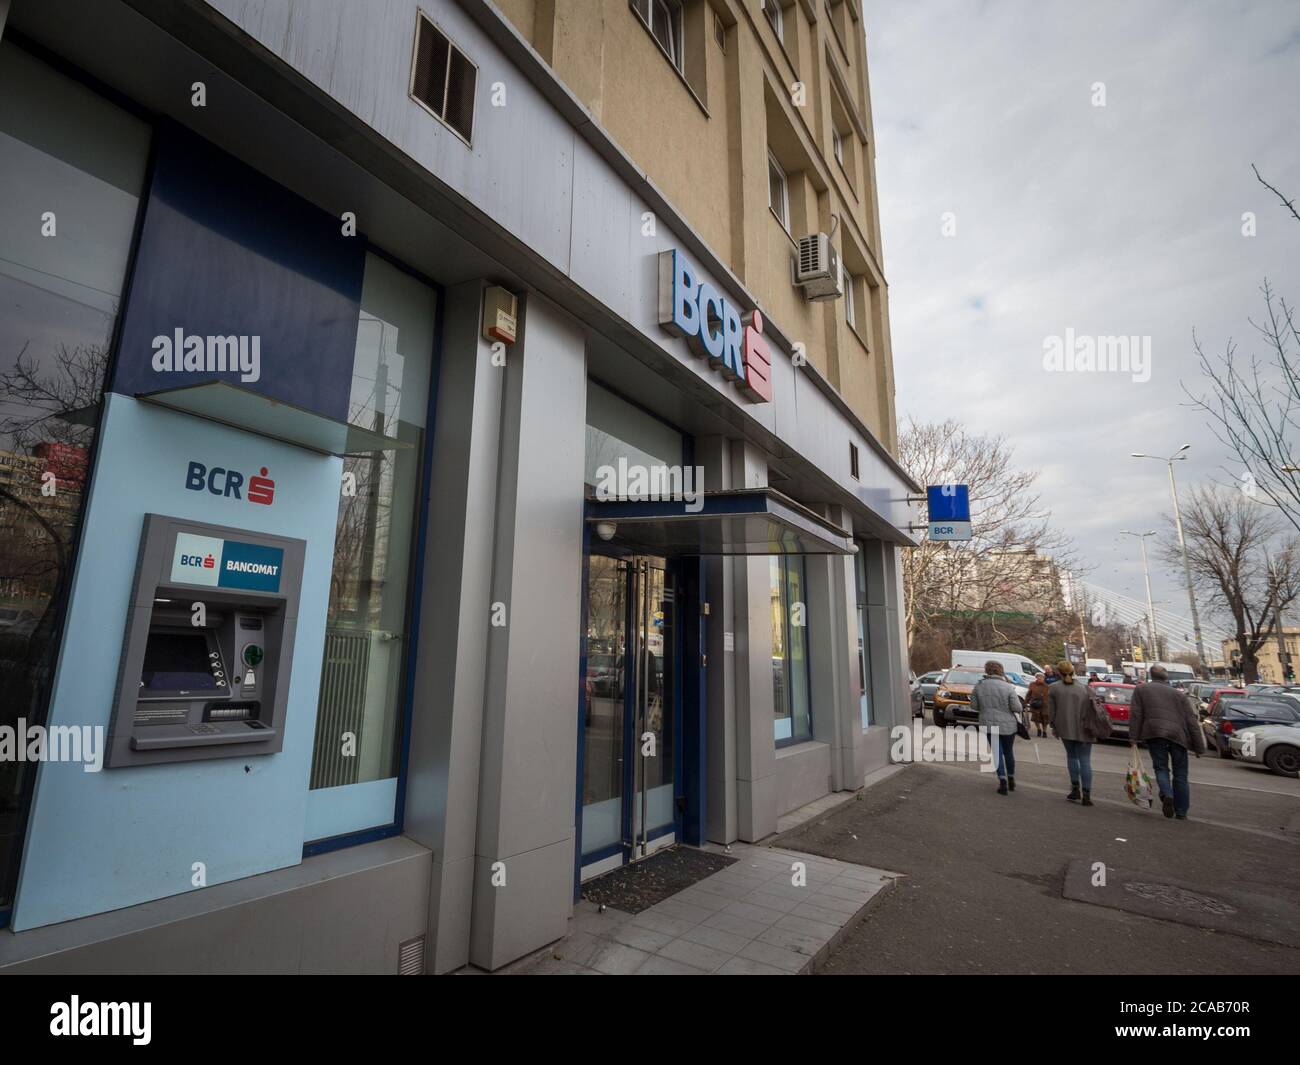 BUCHAREST, ROMANIA - FEBRUARY 15, 2020: BCR logo in front of a local bank in Bucharest. BCR, or banca comerciala romana, is a romanian retail banking Stock Photo